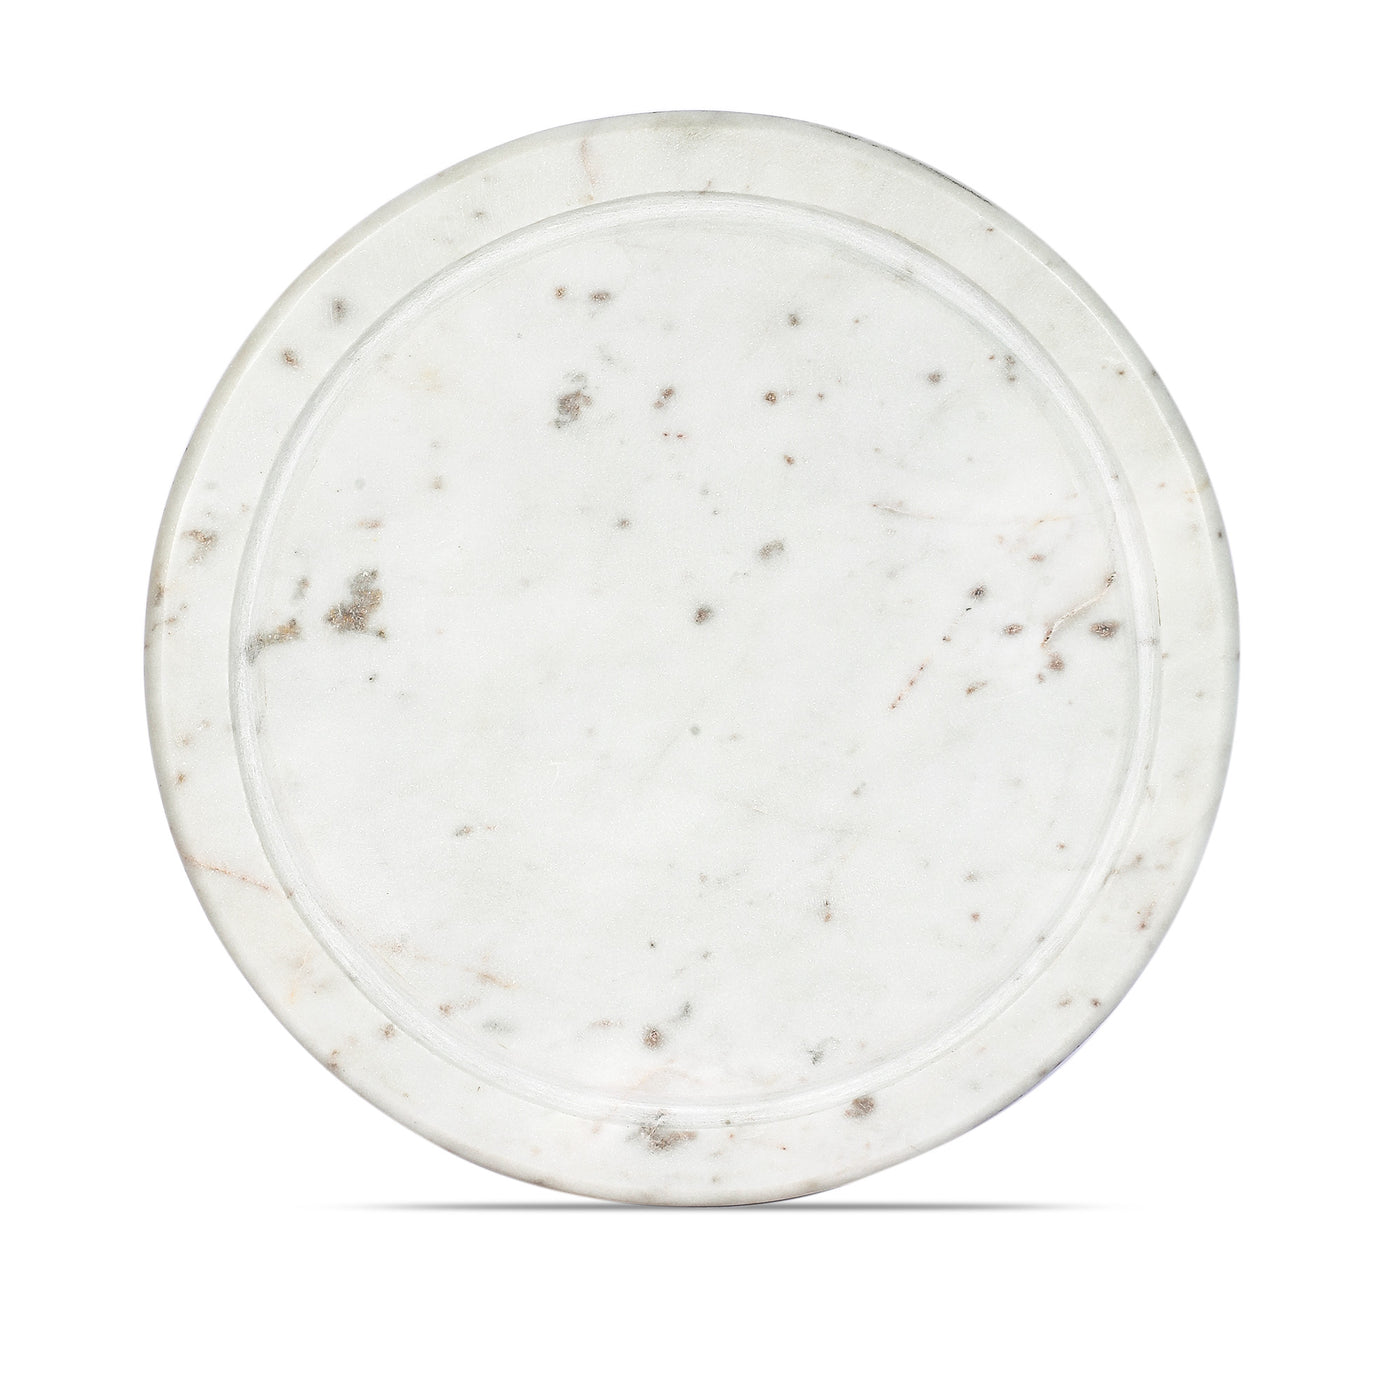 Marbluxe Circular Serving Board with Glass Cover Set of 2